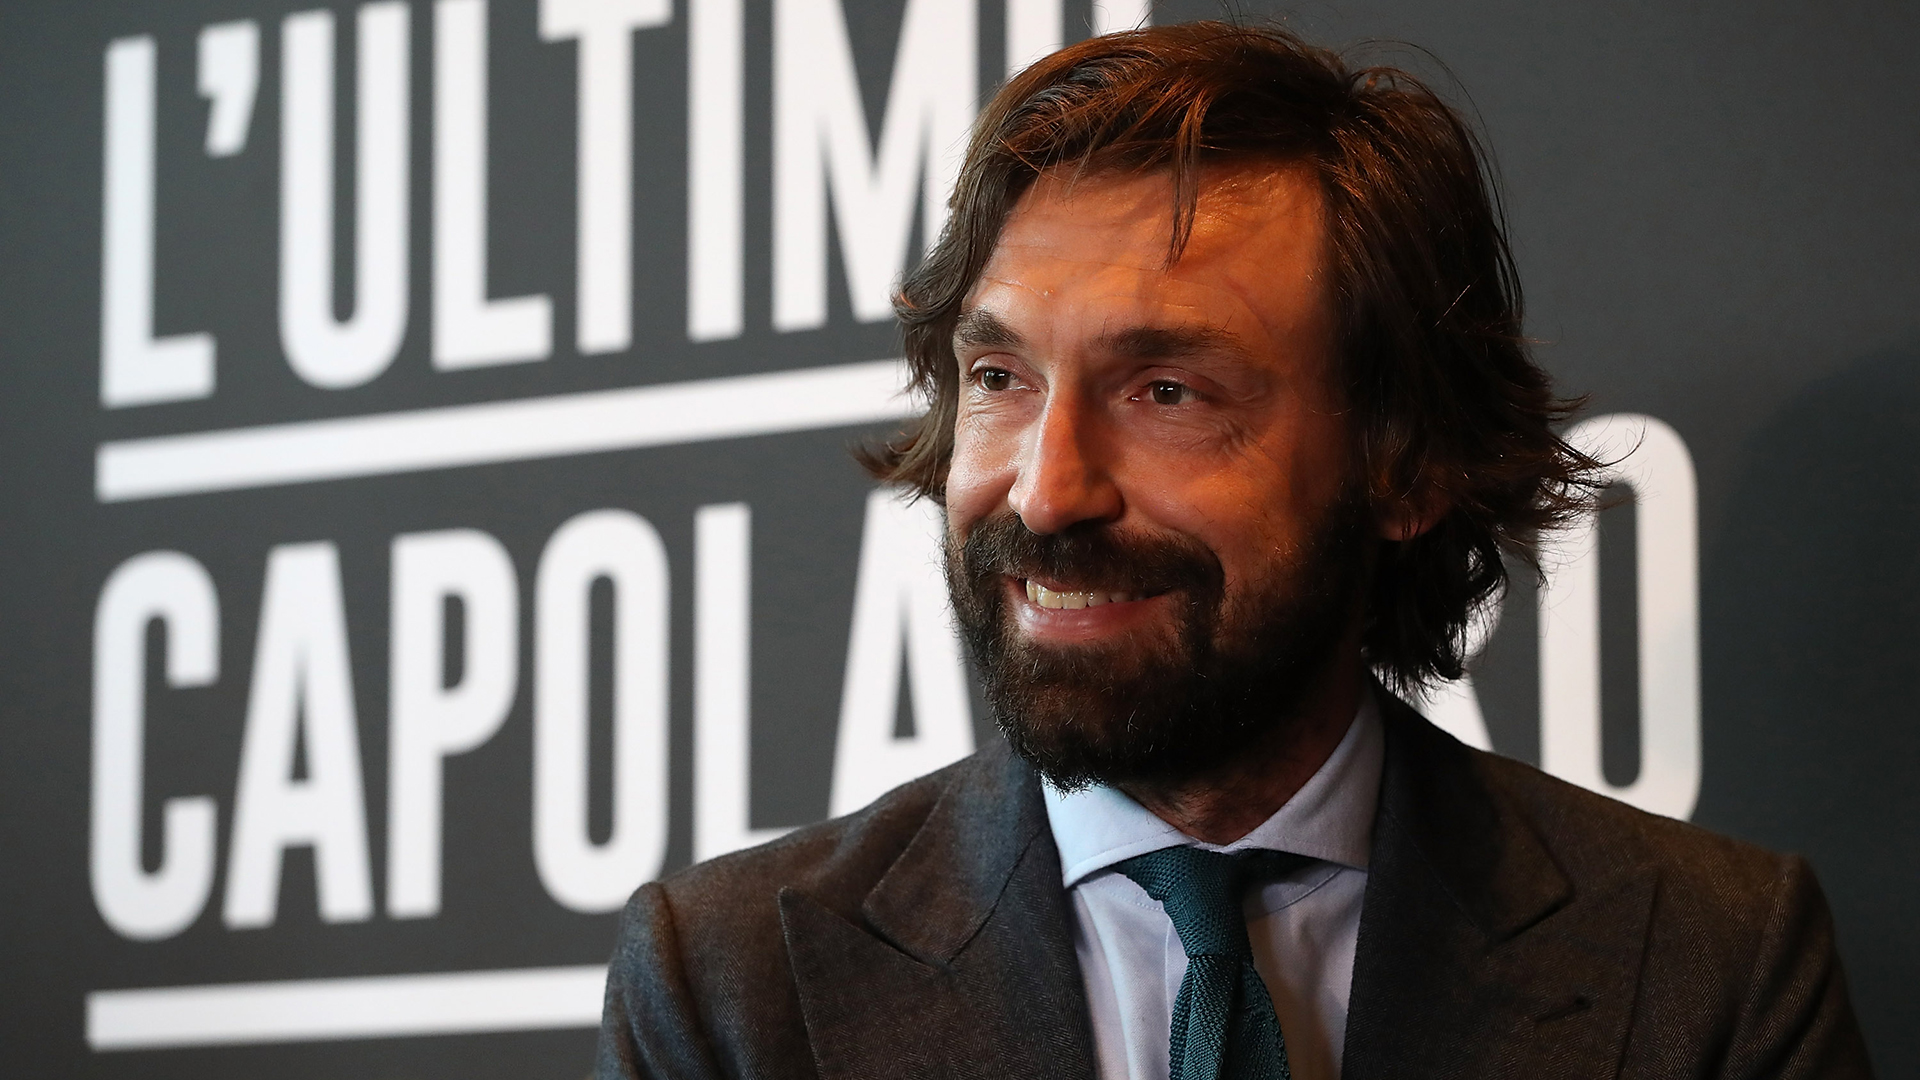 Video:I'm happy for Pirlo but his appointment makes me feel old! - Conte